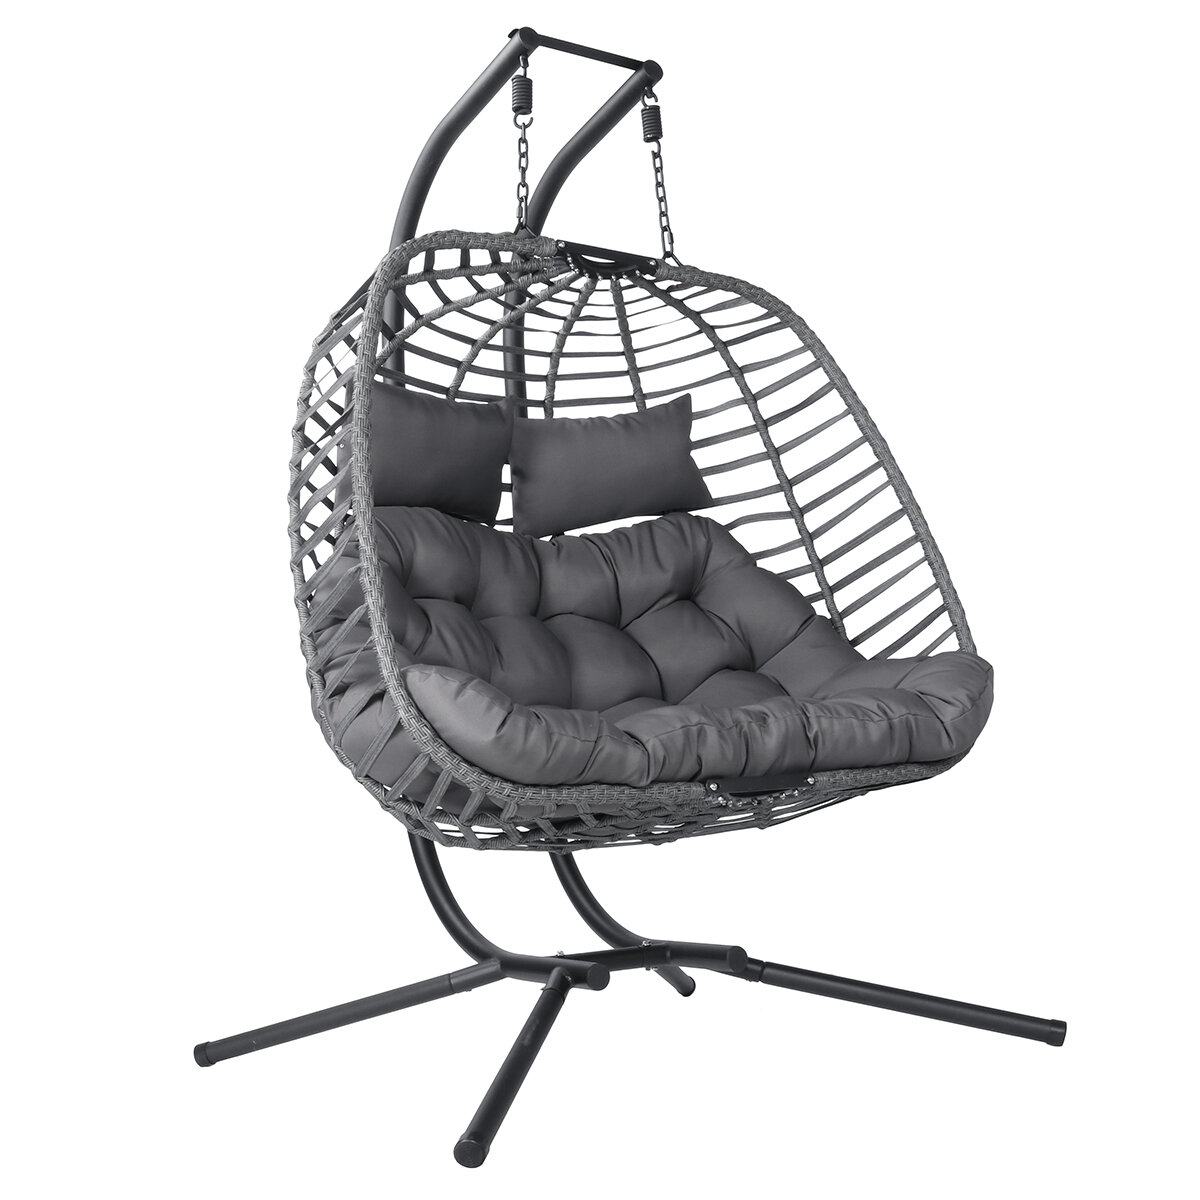 Image of Outdoor Patio Hanging Chair Garden Egg Hammock Chair Double Person Swing Hanging Chair With Frame & Seat Cushion